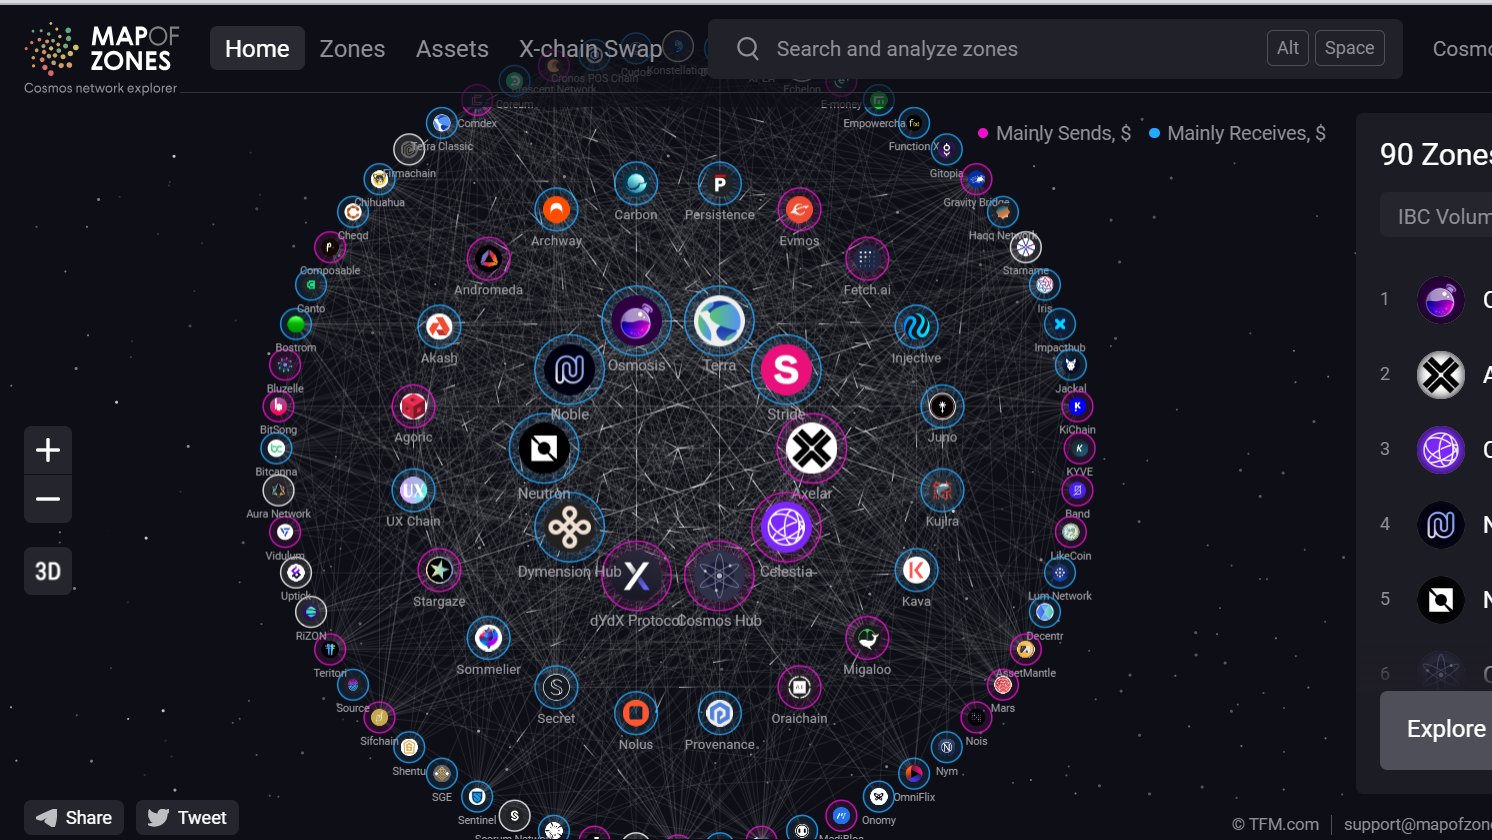 Babylon chain is one of a large number of interconnected blockchains that make up the larger Cosmos network of interconnected zones. Babylon helps improve the security of many of these networks via Bitcoin’s security guarantees, while its long-term goal is to expand to as many chains as possible both within Cosmos and outside the ecosystem to networks such as Ethereum and others. (Image Source: screenshot via Map of zones website)